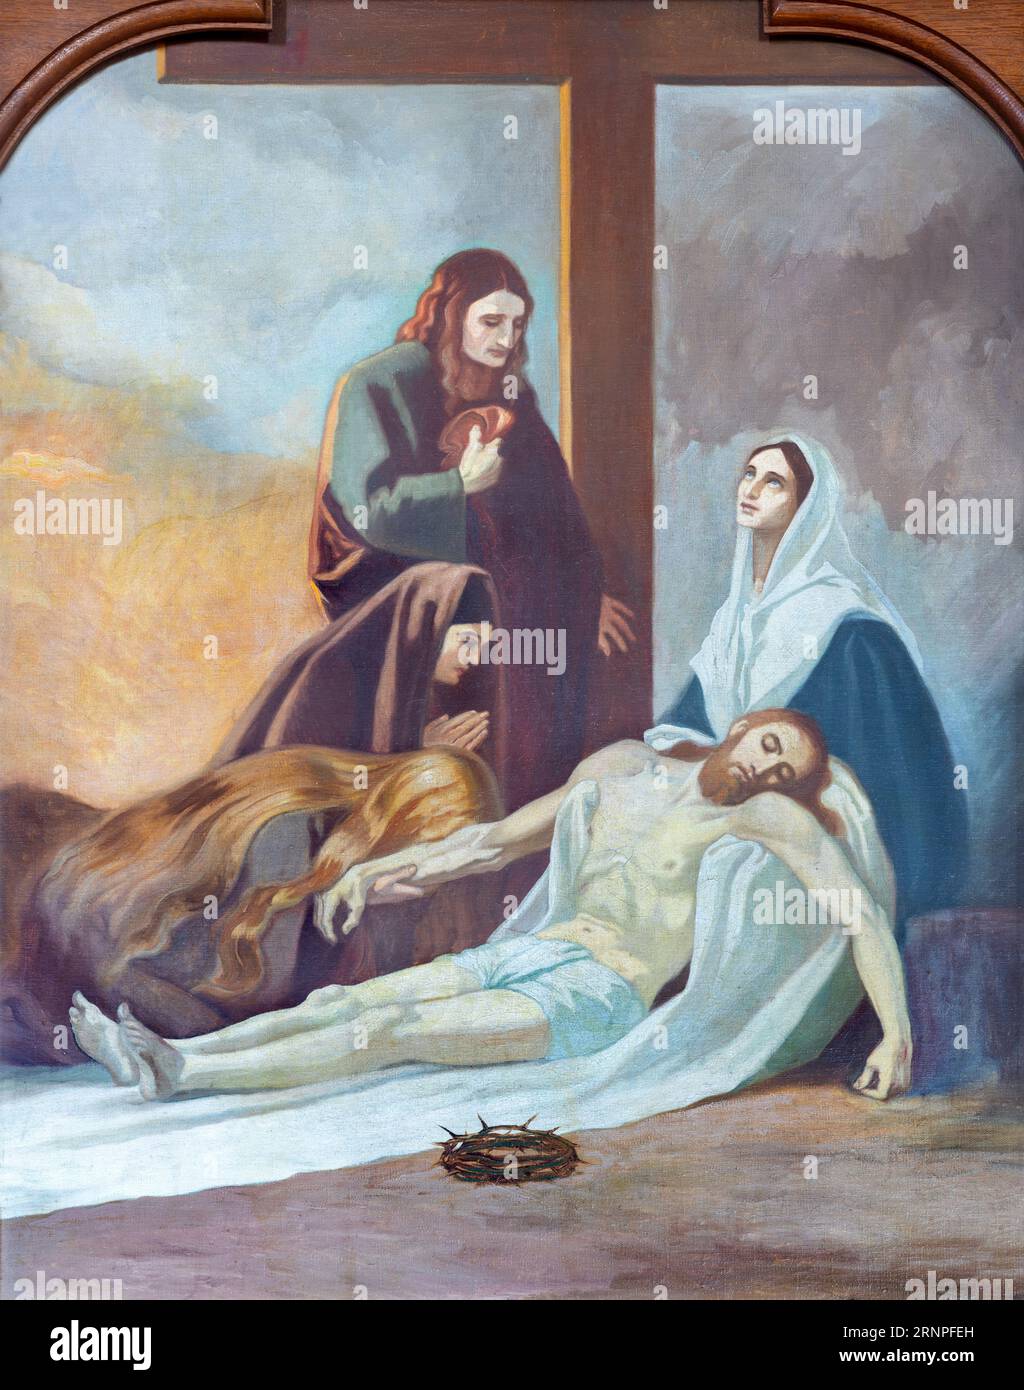 SEBECHLEBY, SLOVAKIA - OKTOBERT 8, 2022: The painting Deposition (Pieta) as part of Cross way stations in St. Michael parish church by unkonwn artist Stock Photo